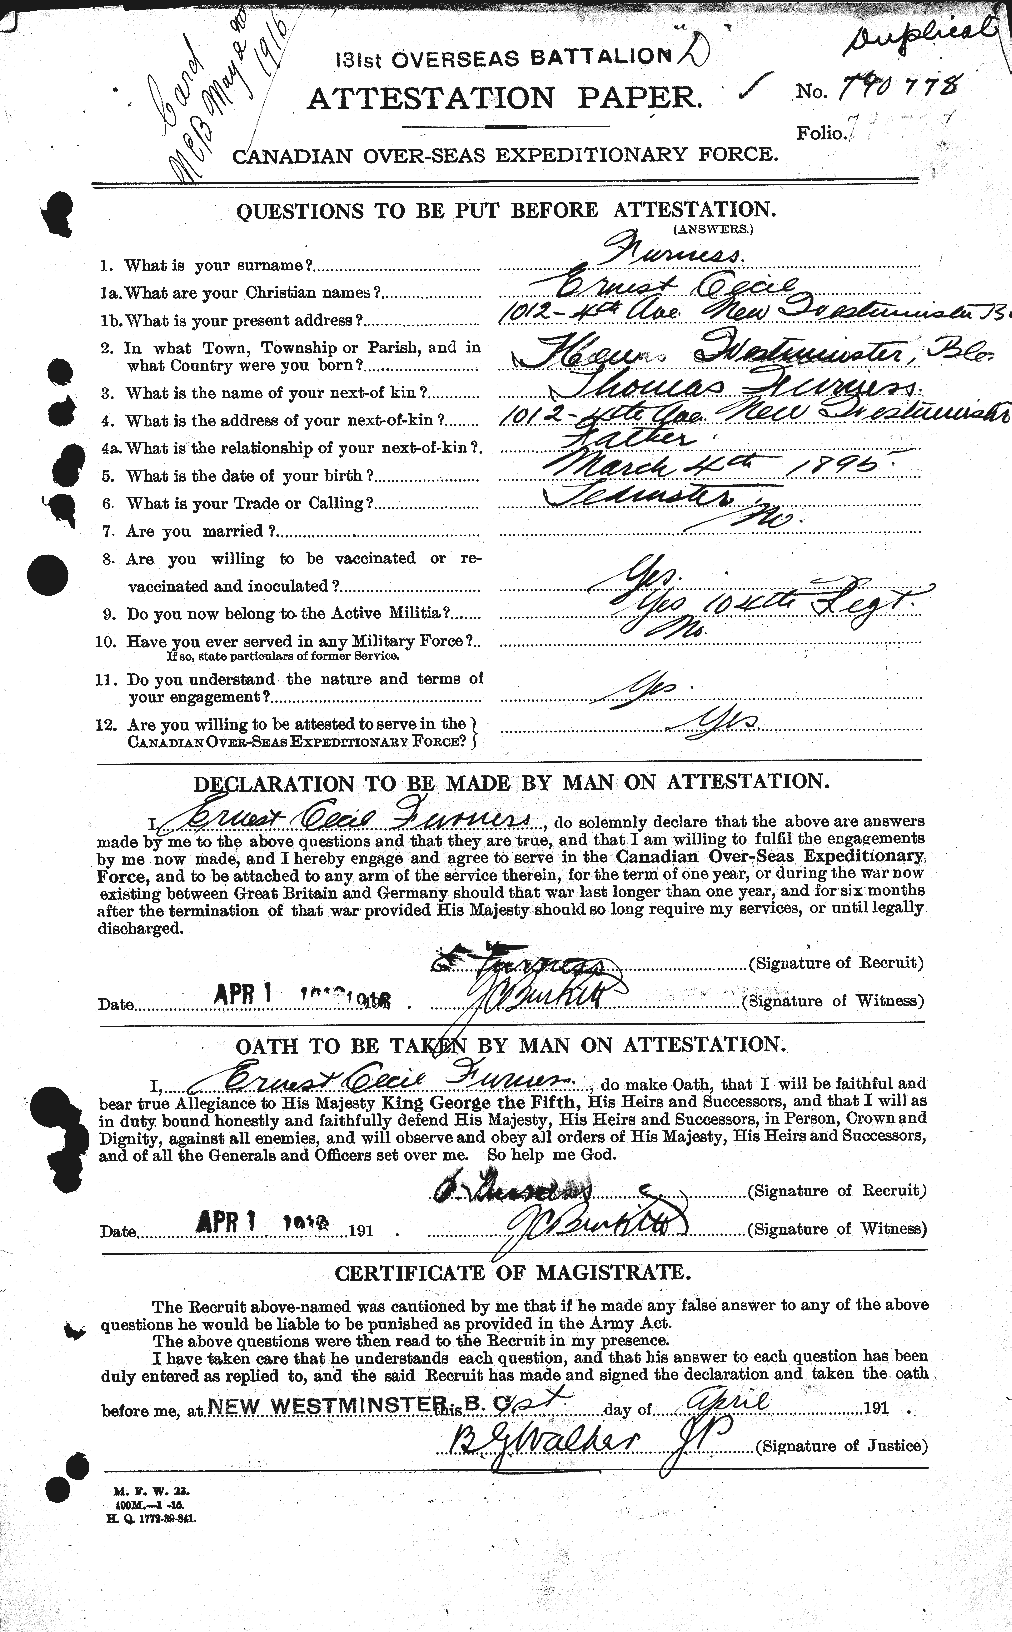 Personnel Records of the First World War - CEF 335467a